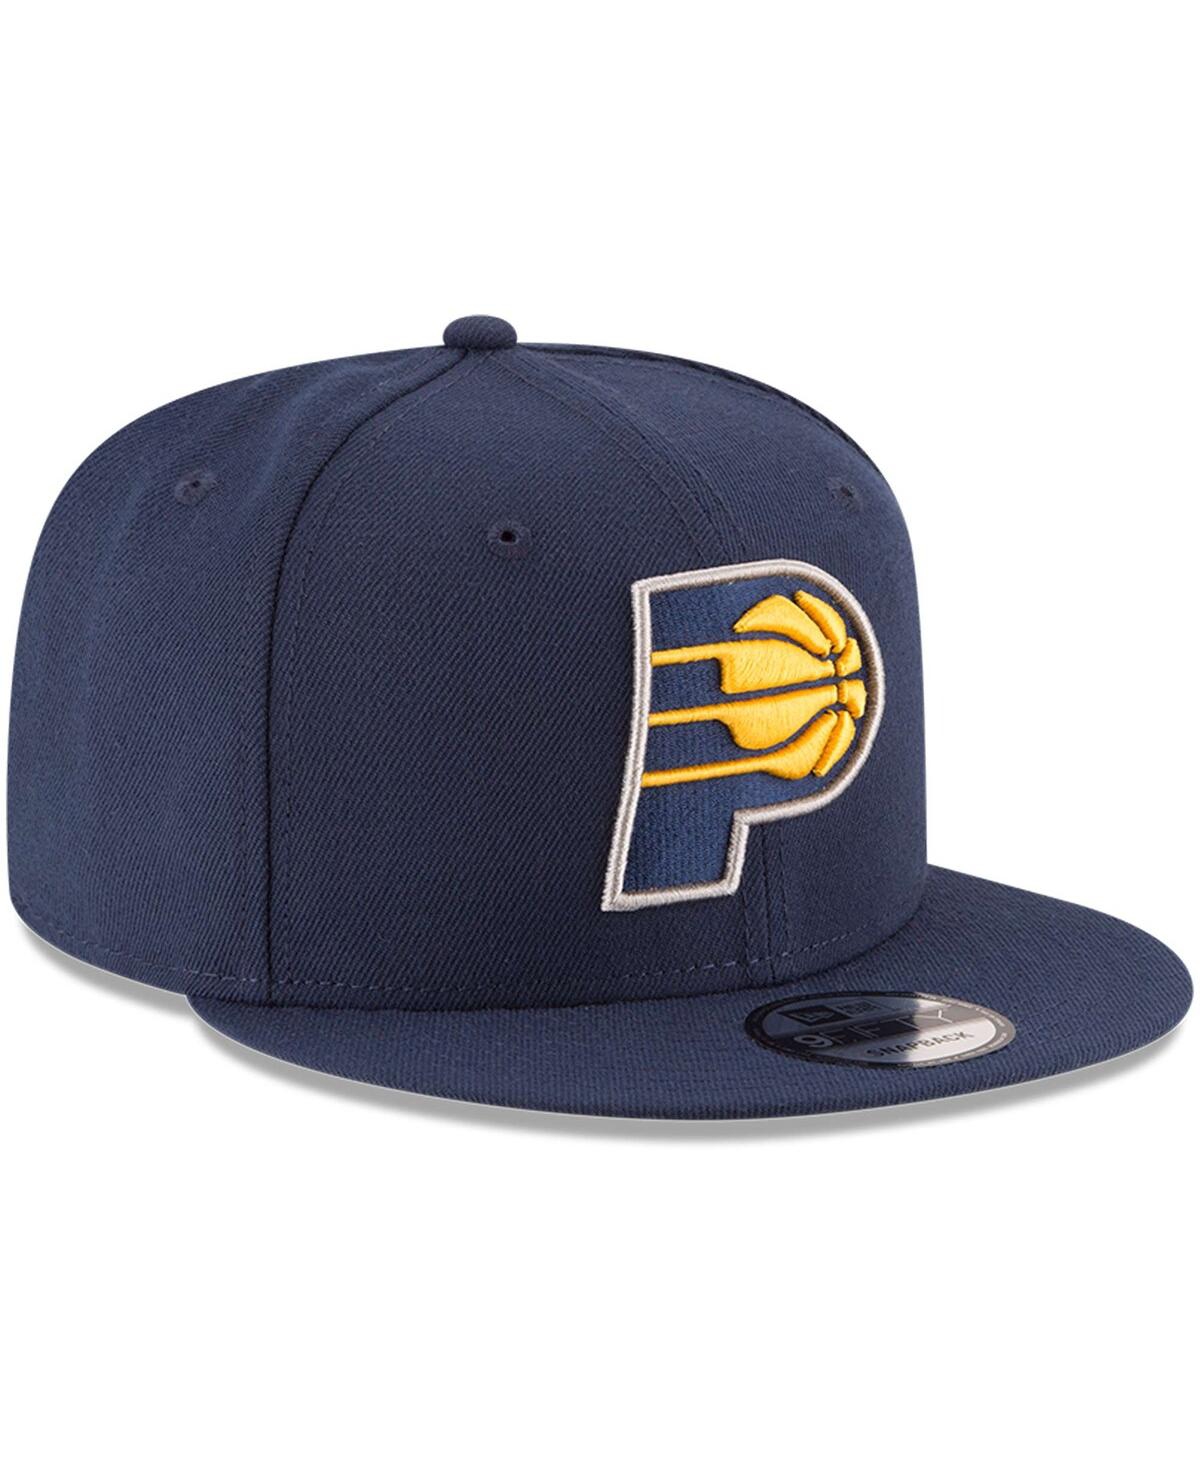 Shop New Era Men's  Navy Indiana Pacers Official Team Color 9fifty Snapback Hat